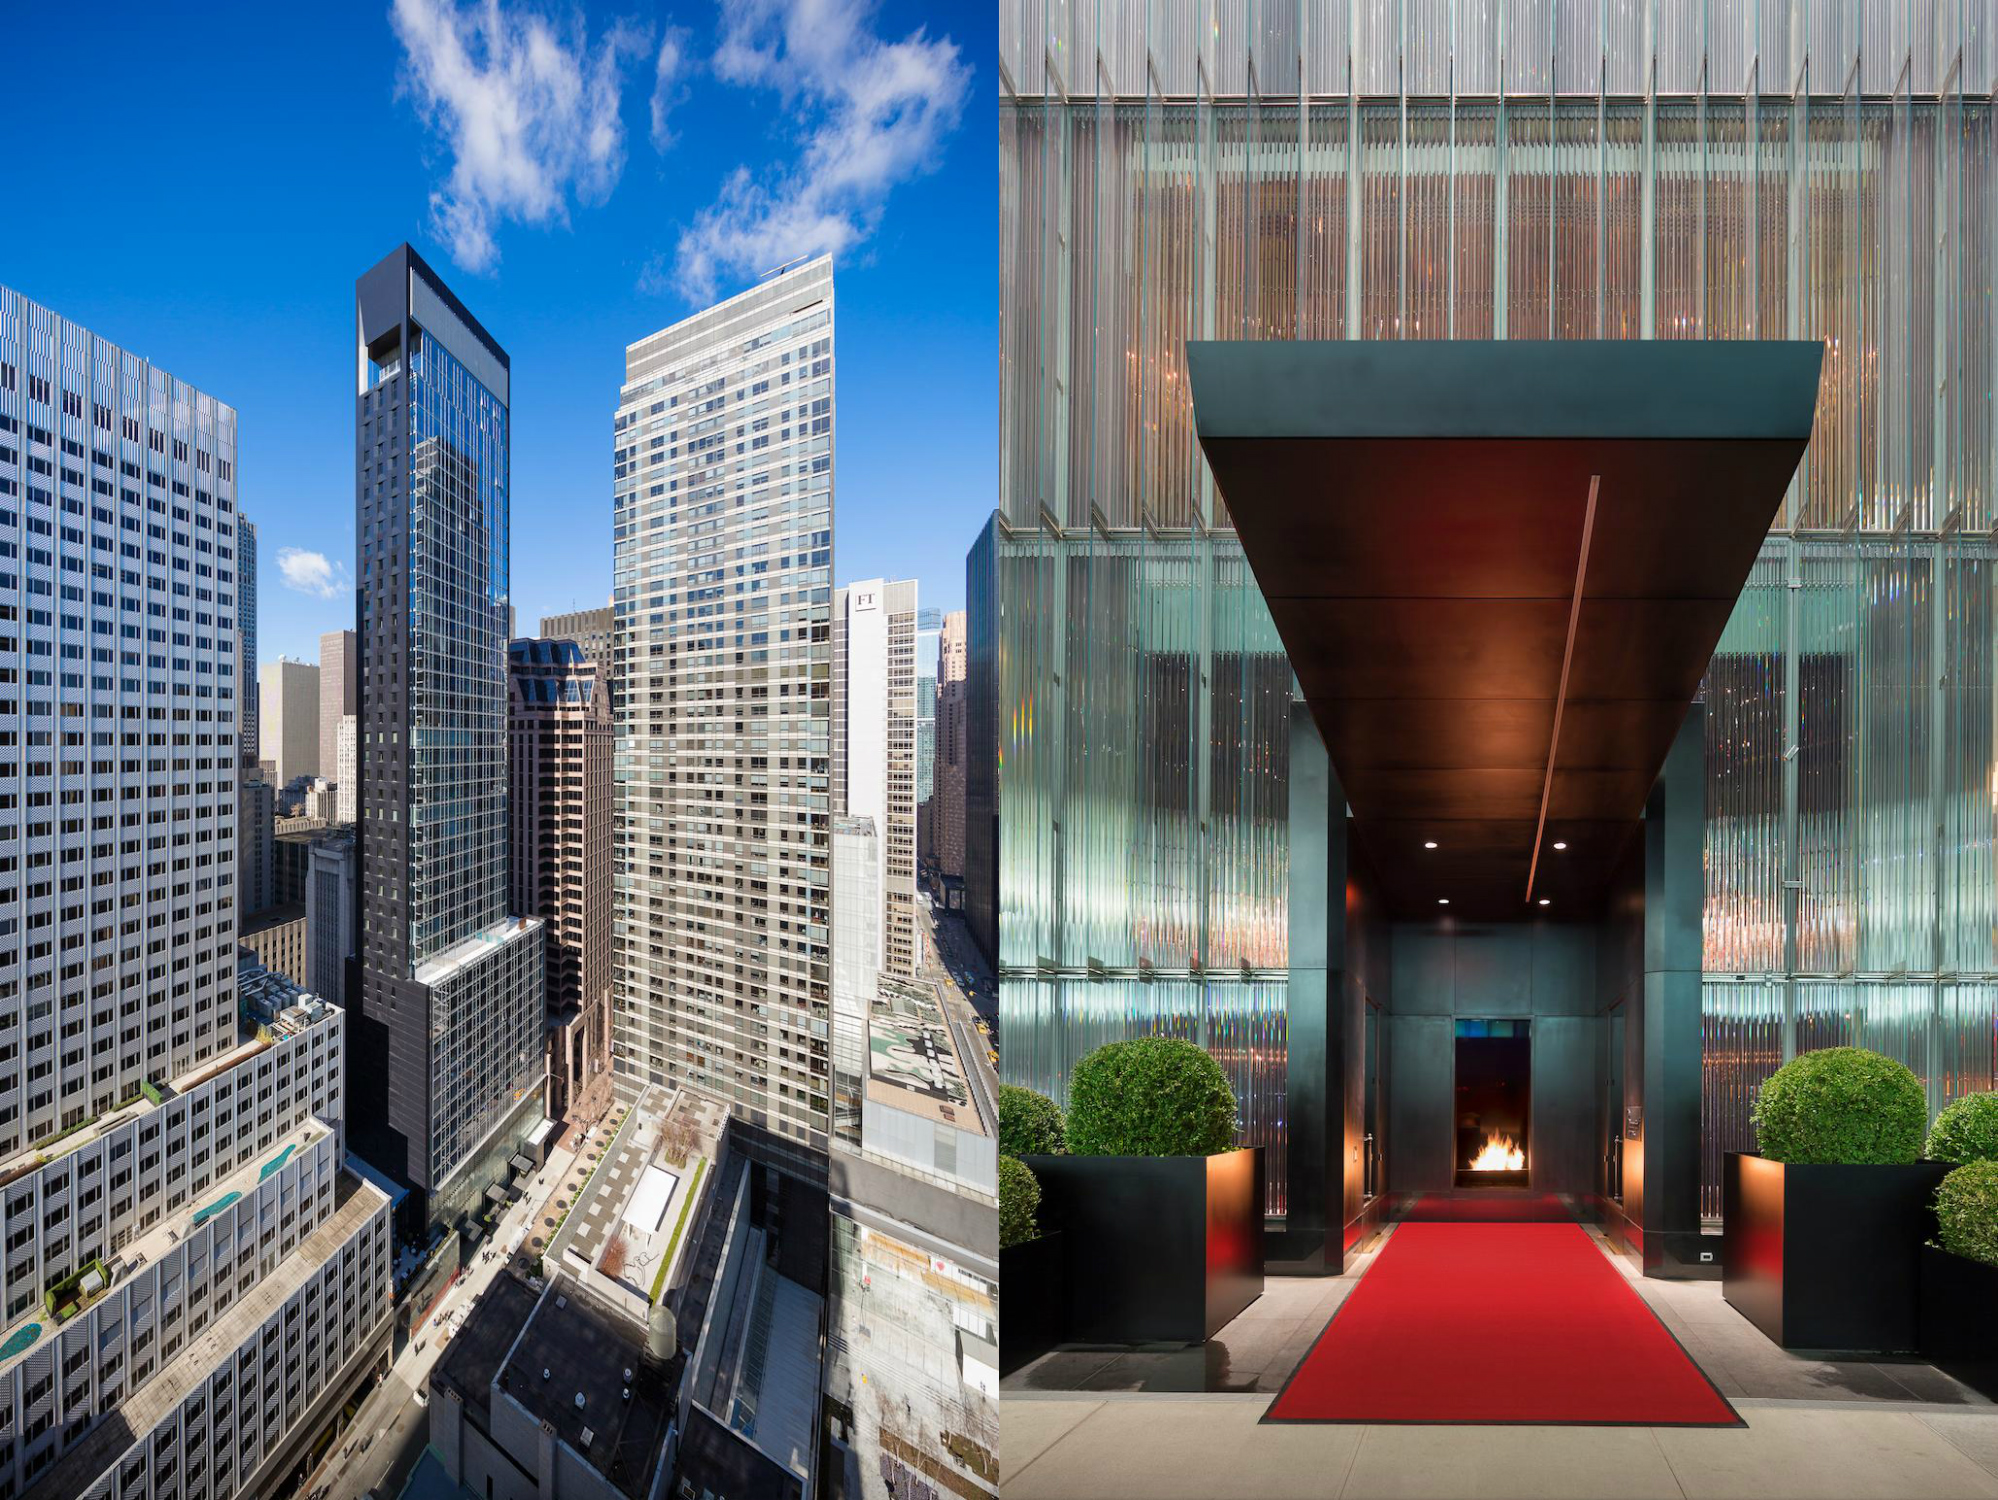 50-Story Baccarat Hotel Residences West 53rd Street Now 80 